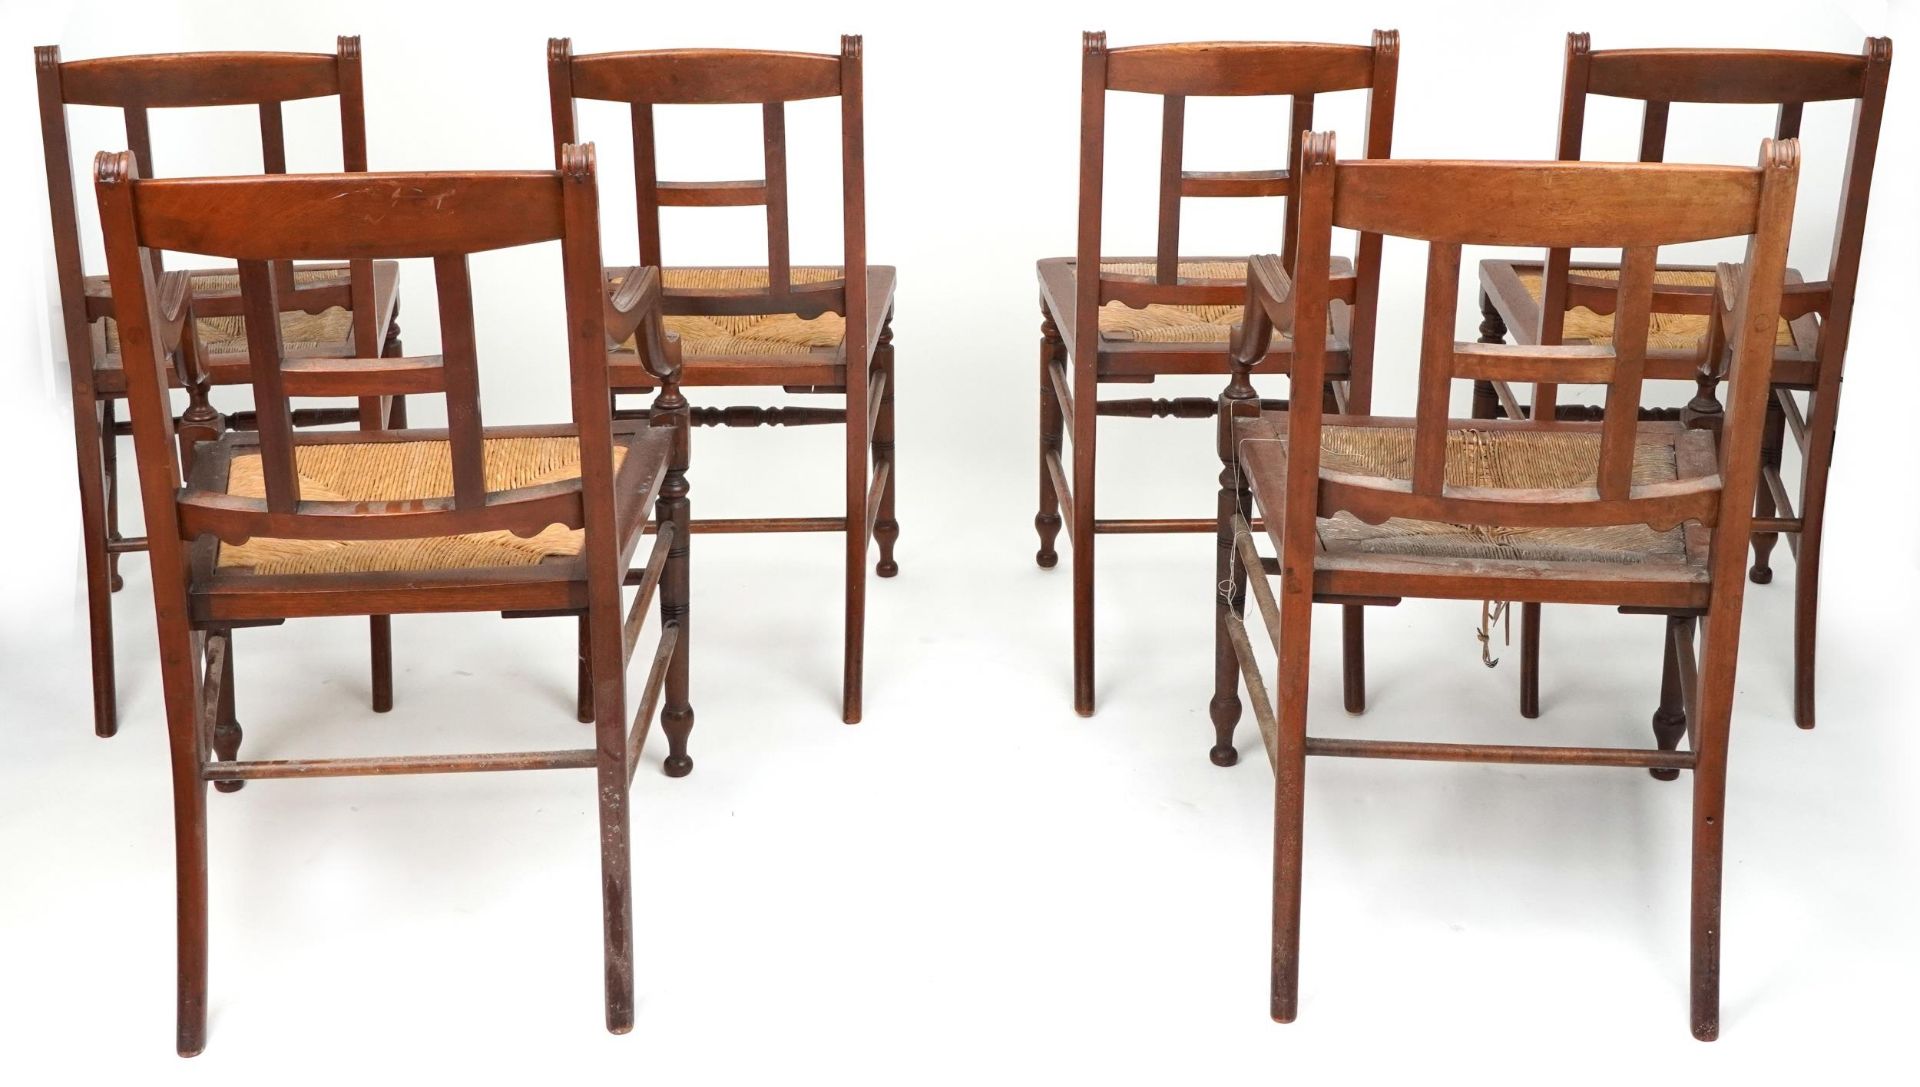 Blyth & Sons of Chiswell Street London, set of six Victorian aesthetic walnut dining chairs - Image 3 of 4